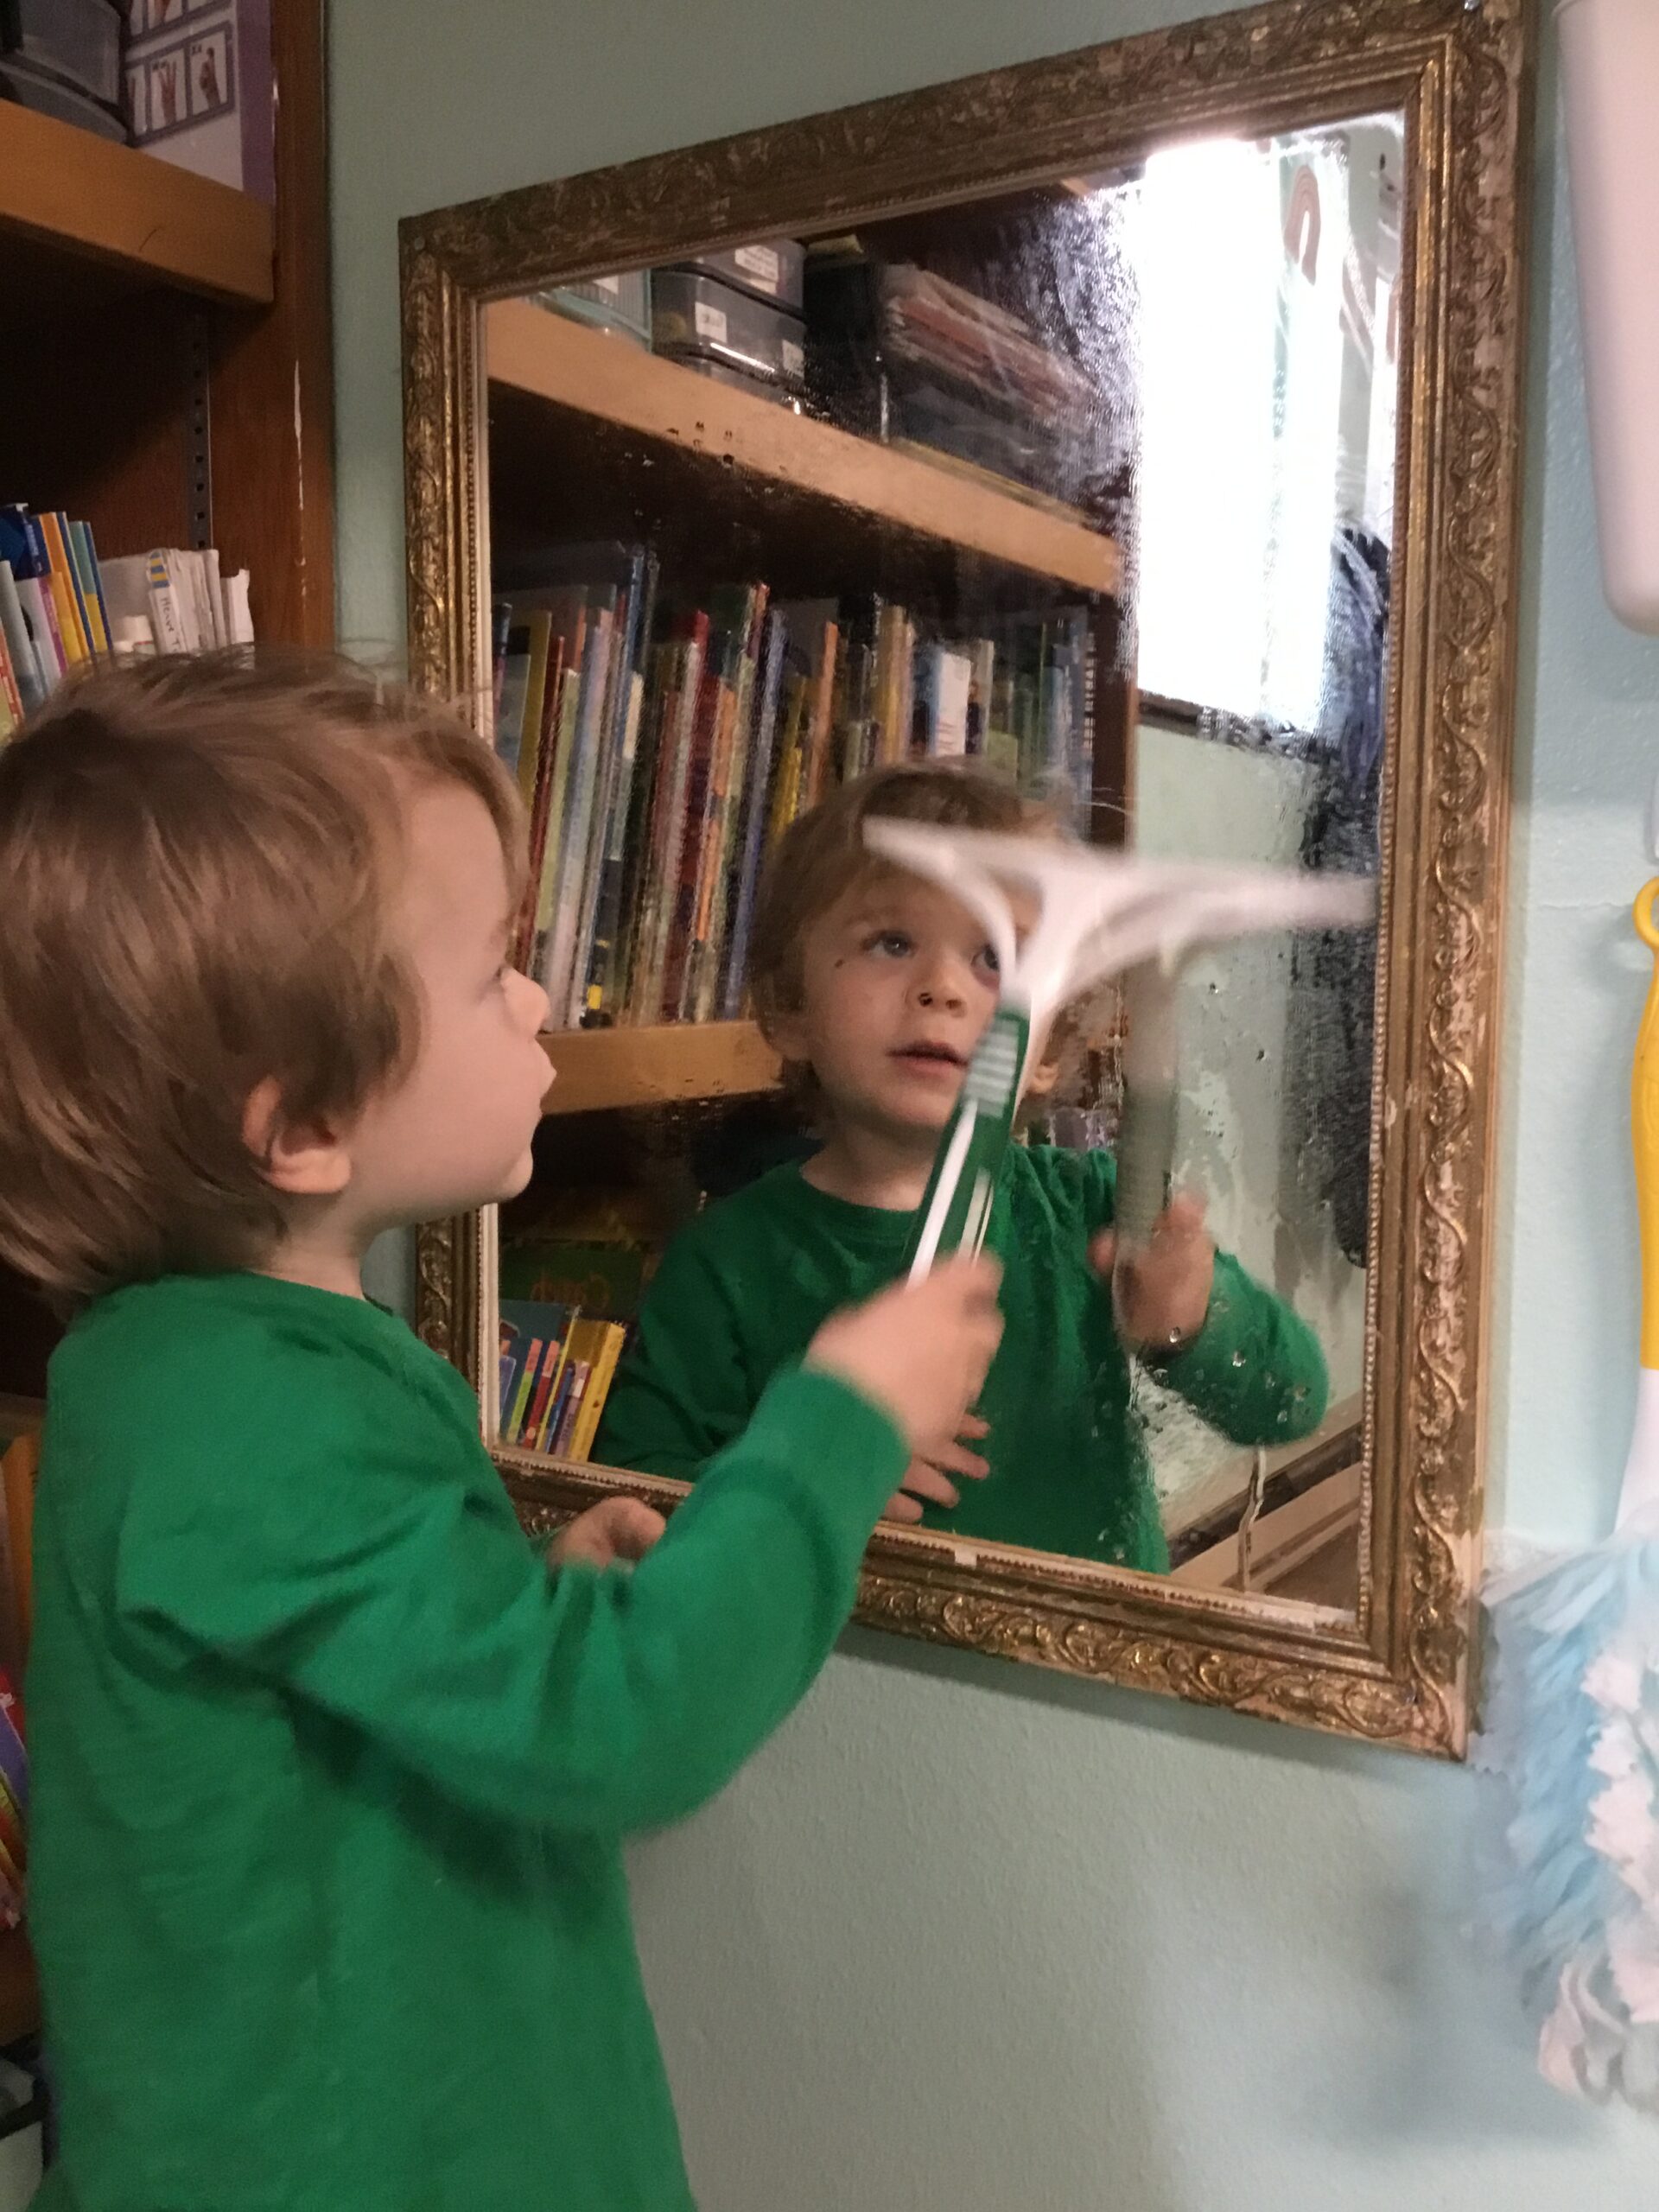 Child using a squeegee on a mirror